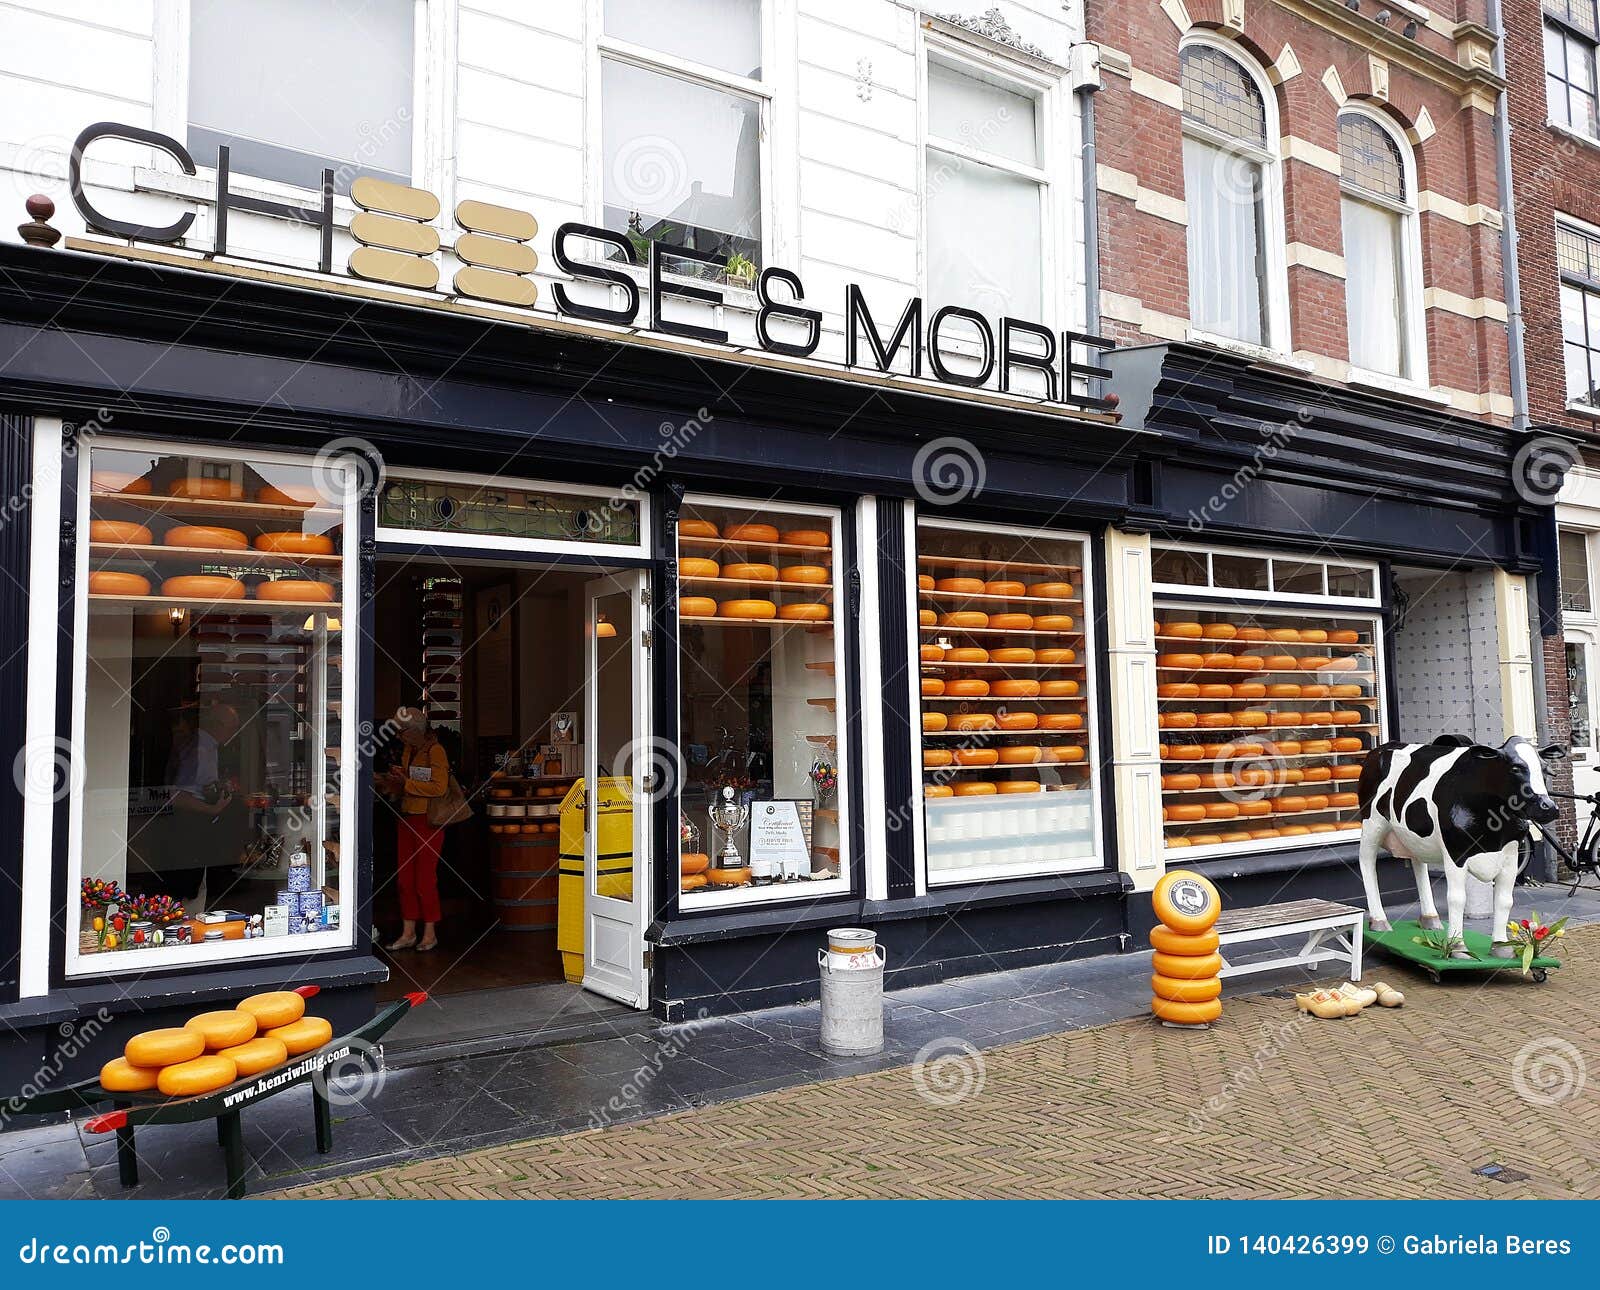 and Shop, Dutch Cheese Shop Delft, Netherlands. Editorial Stock Image - Image of food, delfts: 140426399